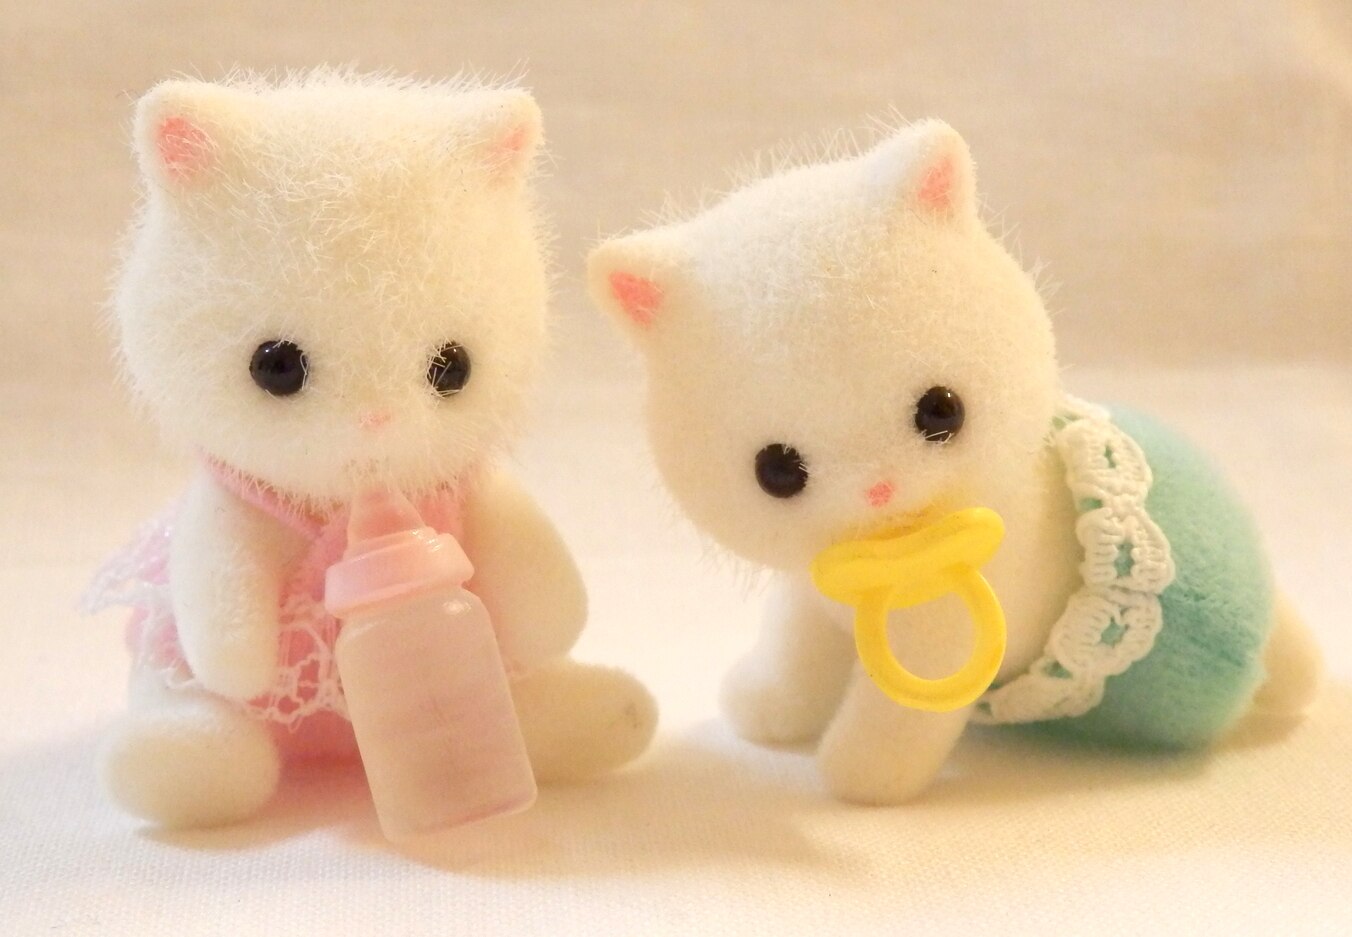 SILK CAT TWINS NI-111 Epoch Sylvanian Families Calico Critters